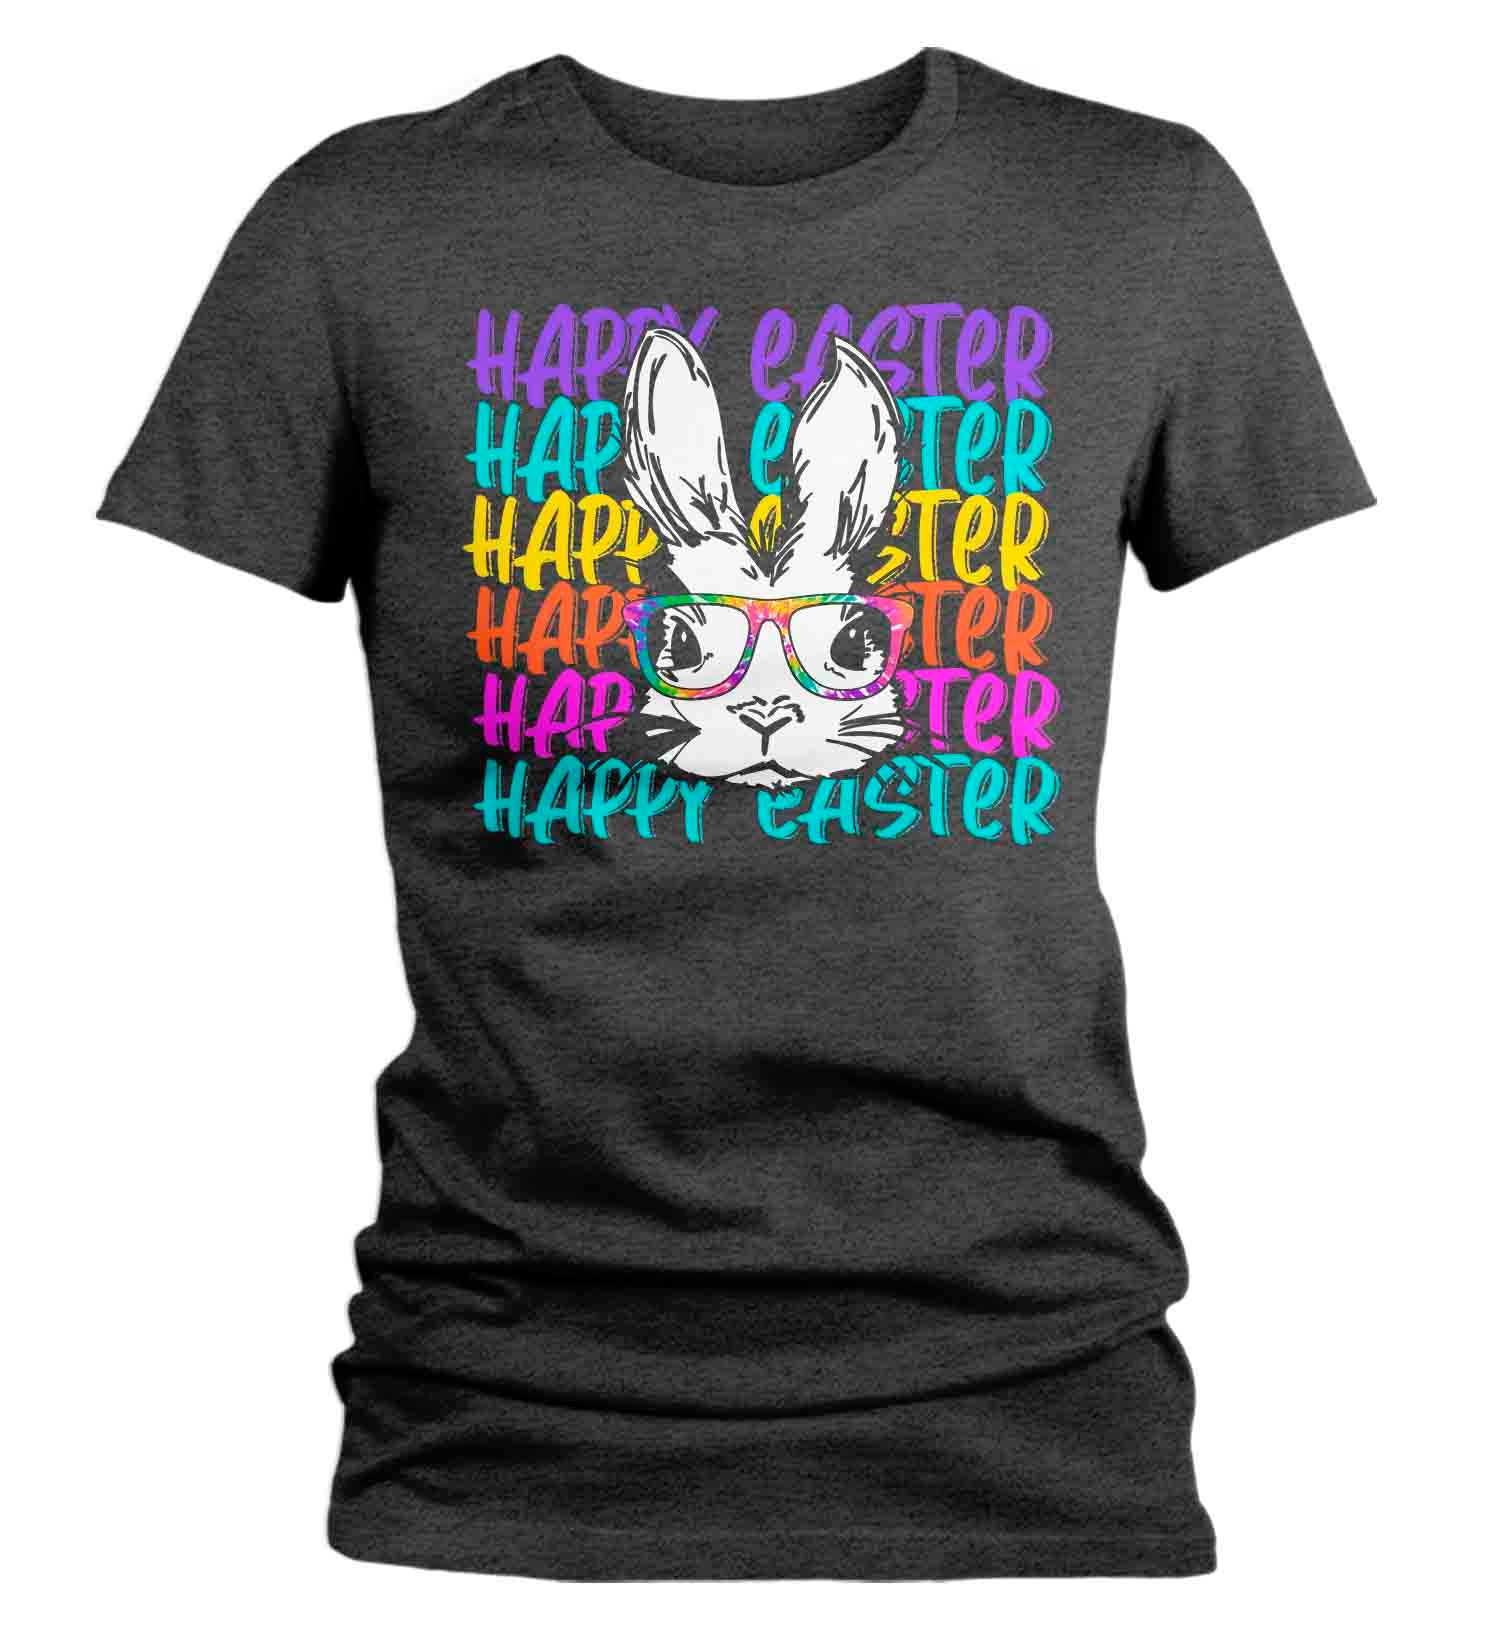 Women's Easter Shirt Happy Easter Bunny T Shirt Hipster Rabbit Glasses Cute Easter Tee Graphic G